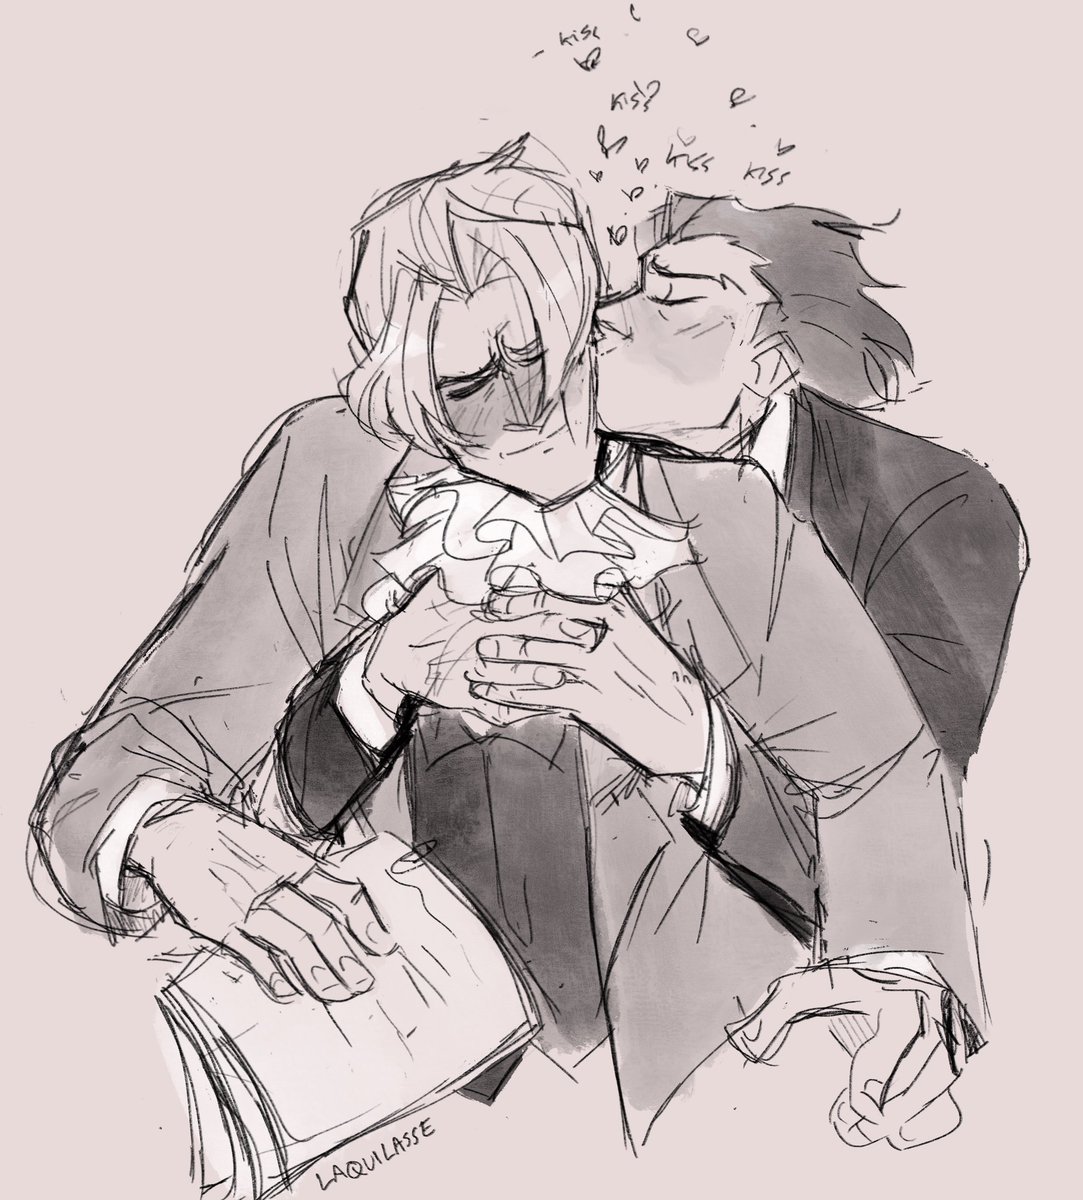 Day 3, it's THEIR DAY ? just thought I'd post some soft kissy sketches for official narumitsu day ? #nmweek20 